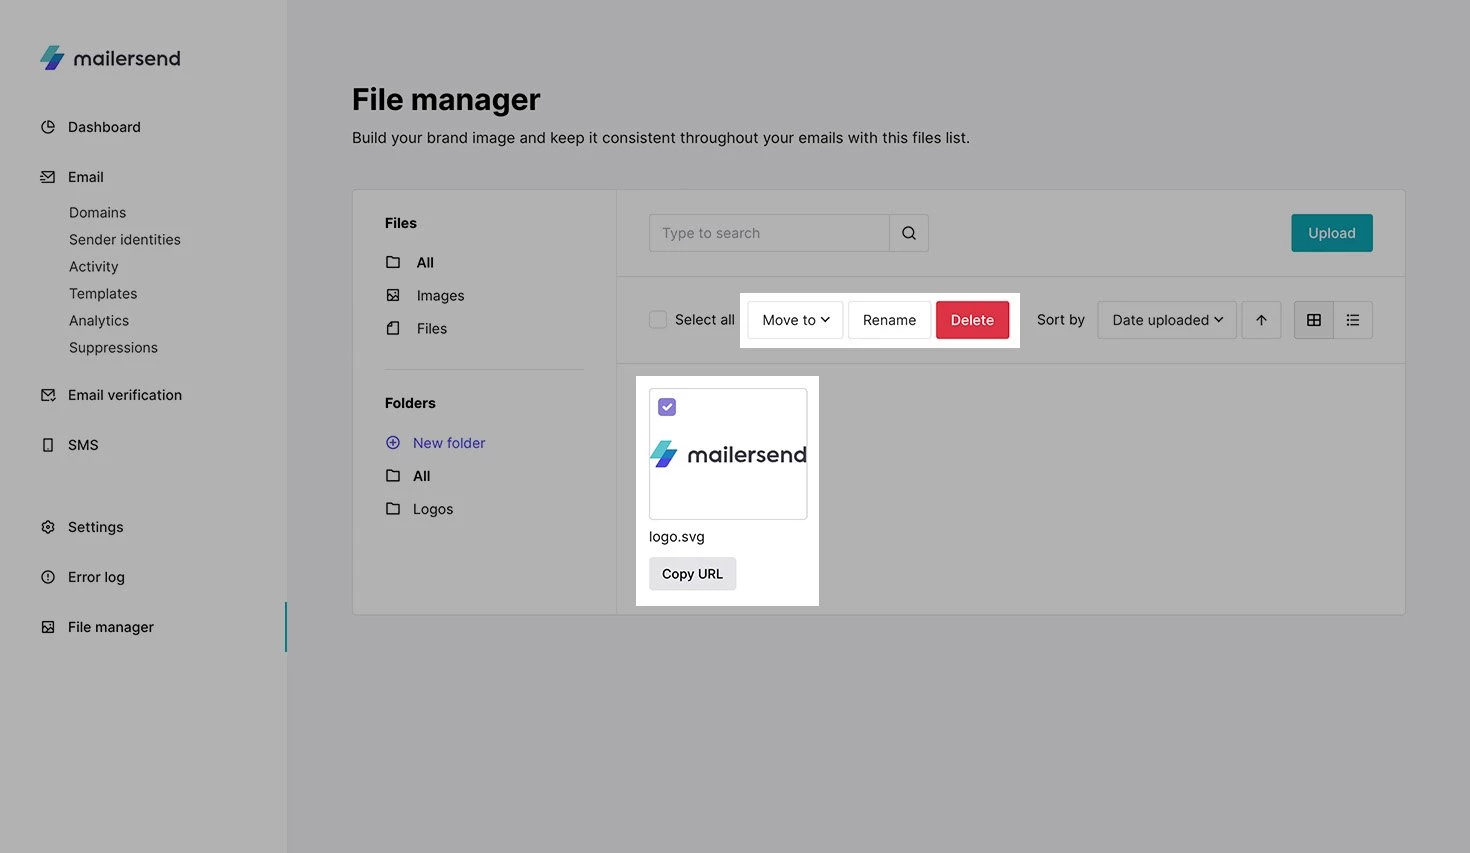 View of file manager with edit and delete options highlighted.